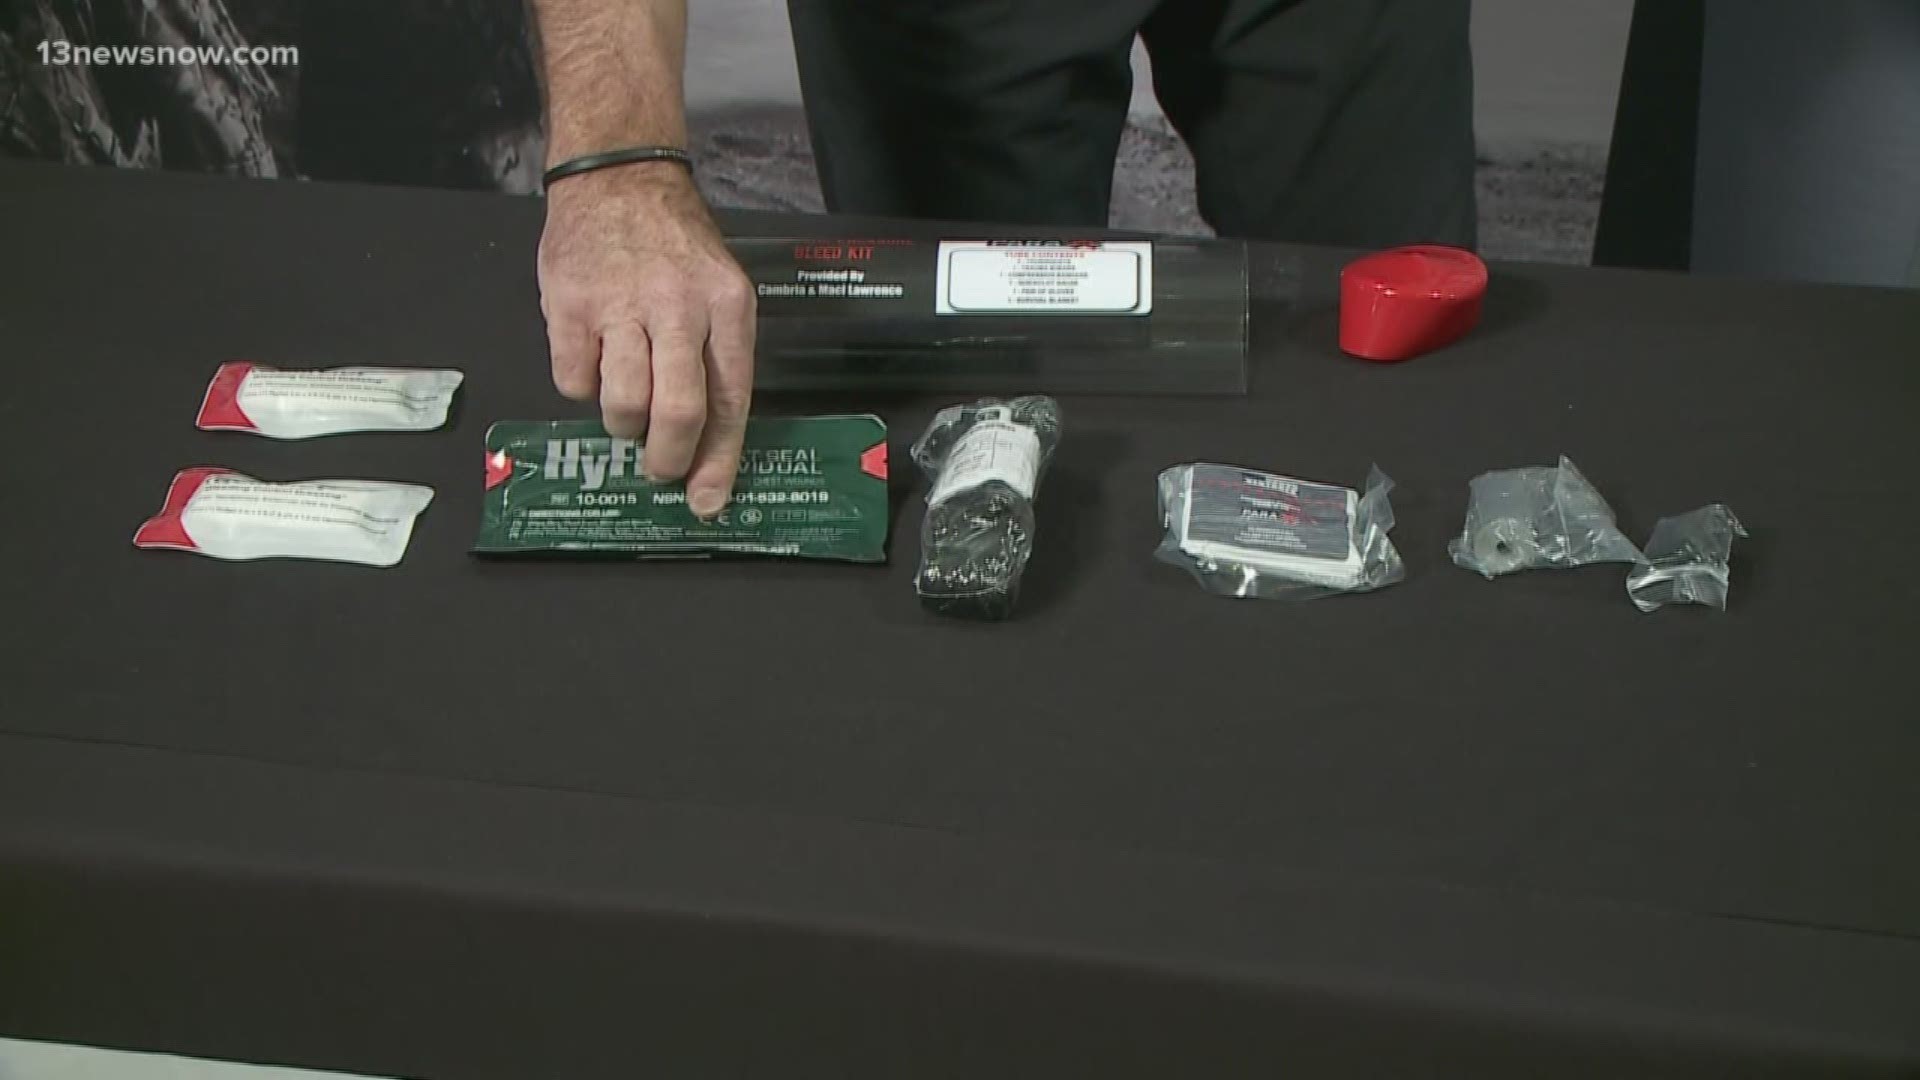 Keep the Pressure Kits created in Hampton Roads are helping victims all over the country.